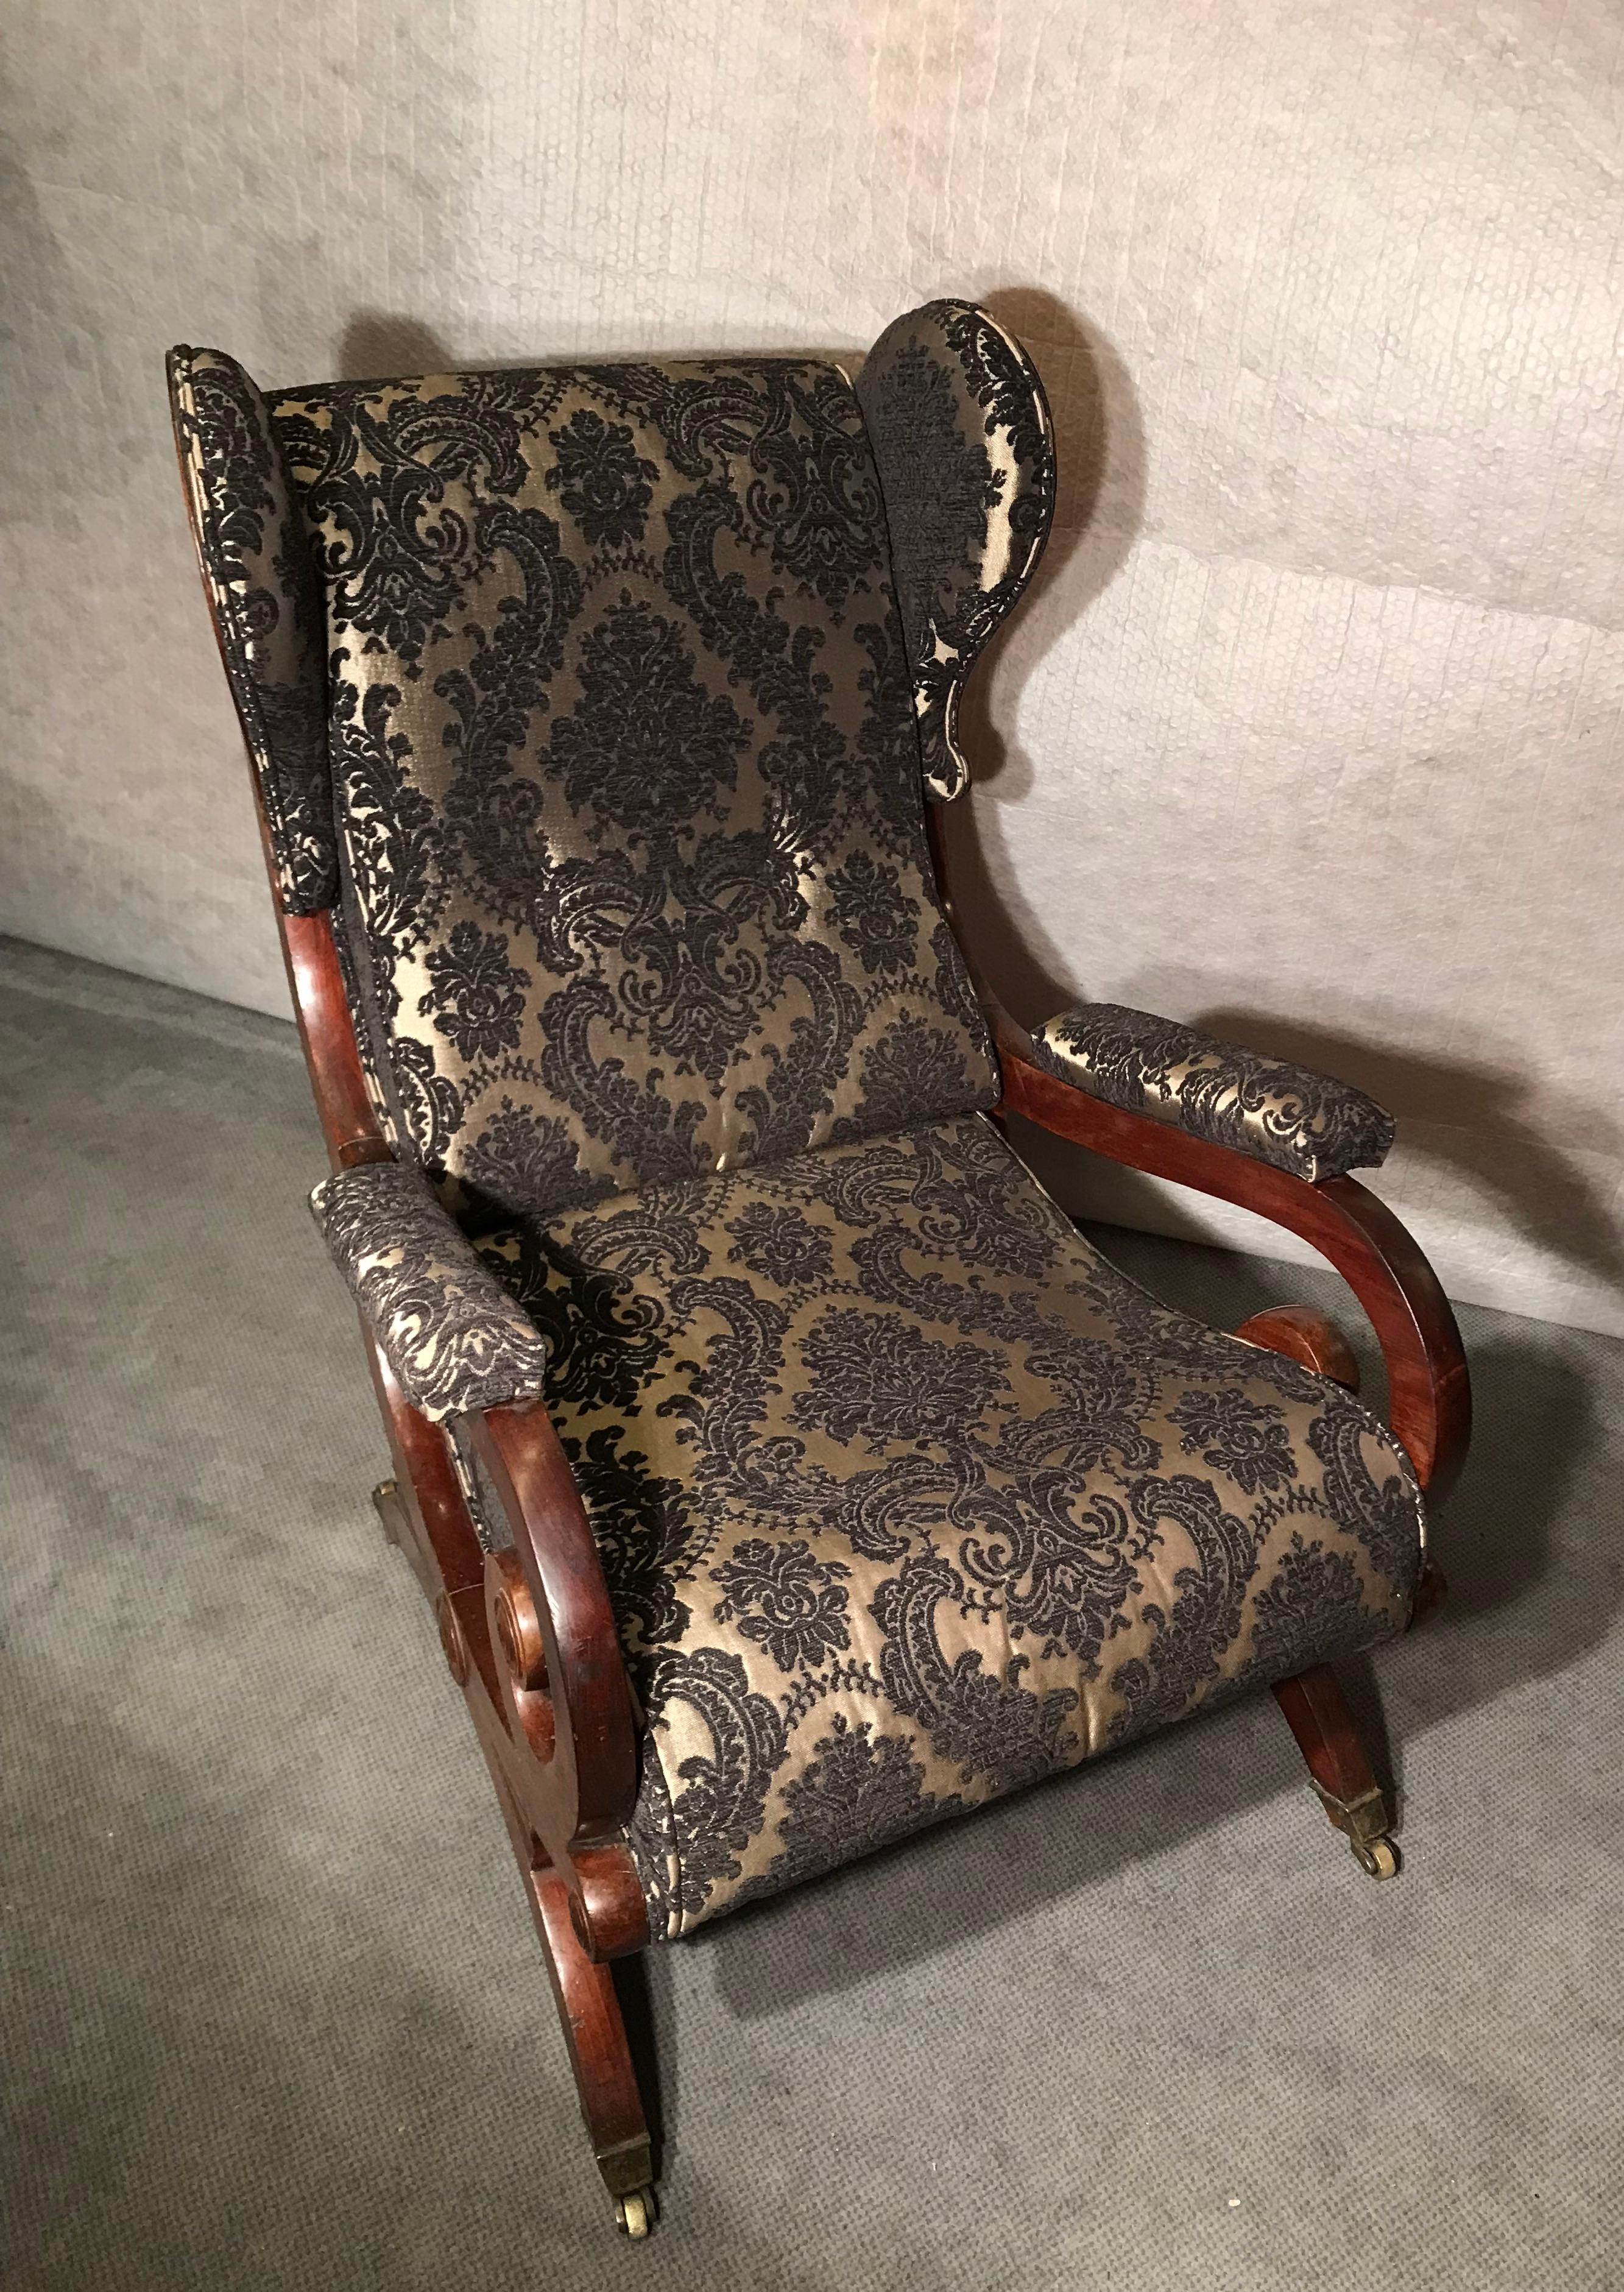 Biedermeier Armchair, attributed to Karl Friedrich Schinkel 1825-30.
This very comfortable armchair dates back to 1825-30, it comes from Berlin and can be attributed to Karl Friedrich Schinkel. The mahogany sleigh back wing chair with open scroll